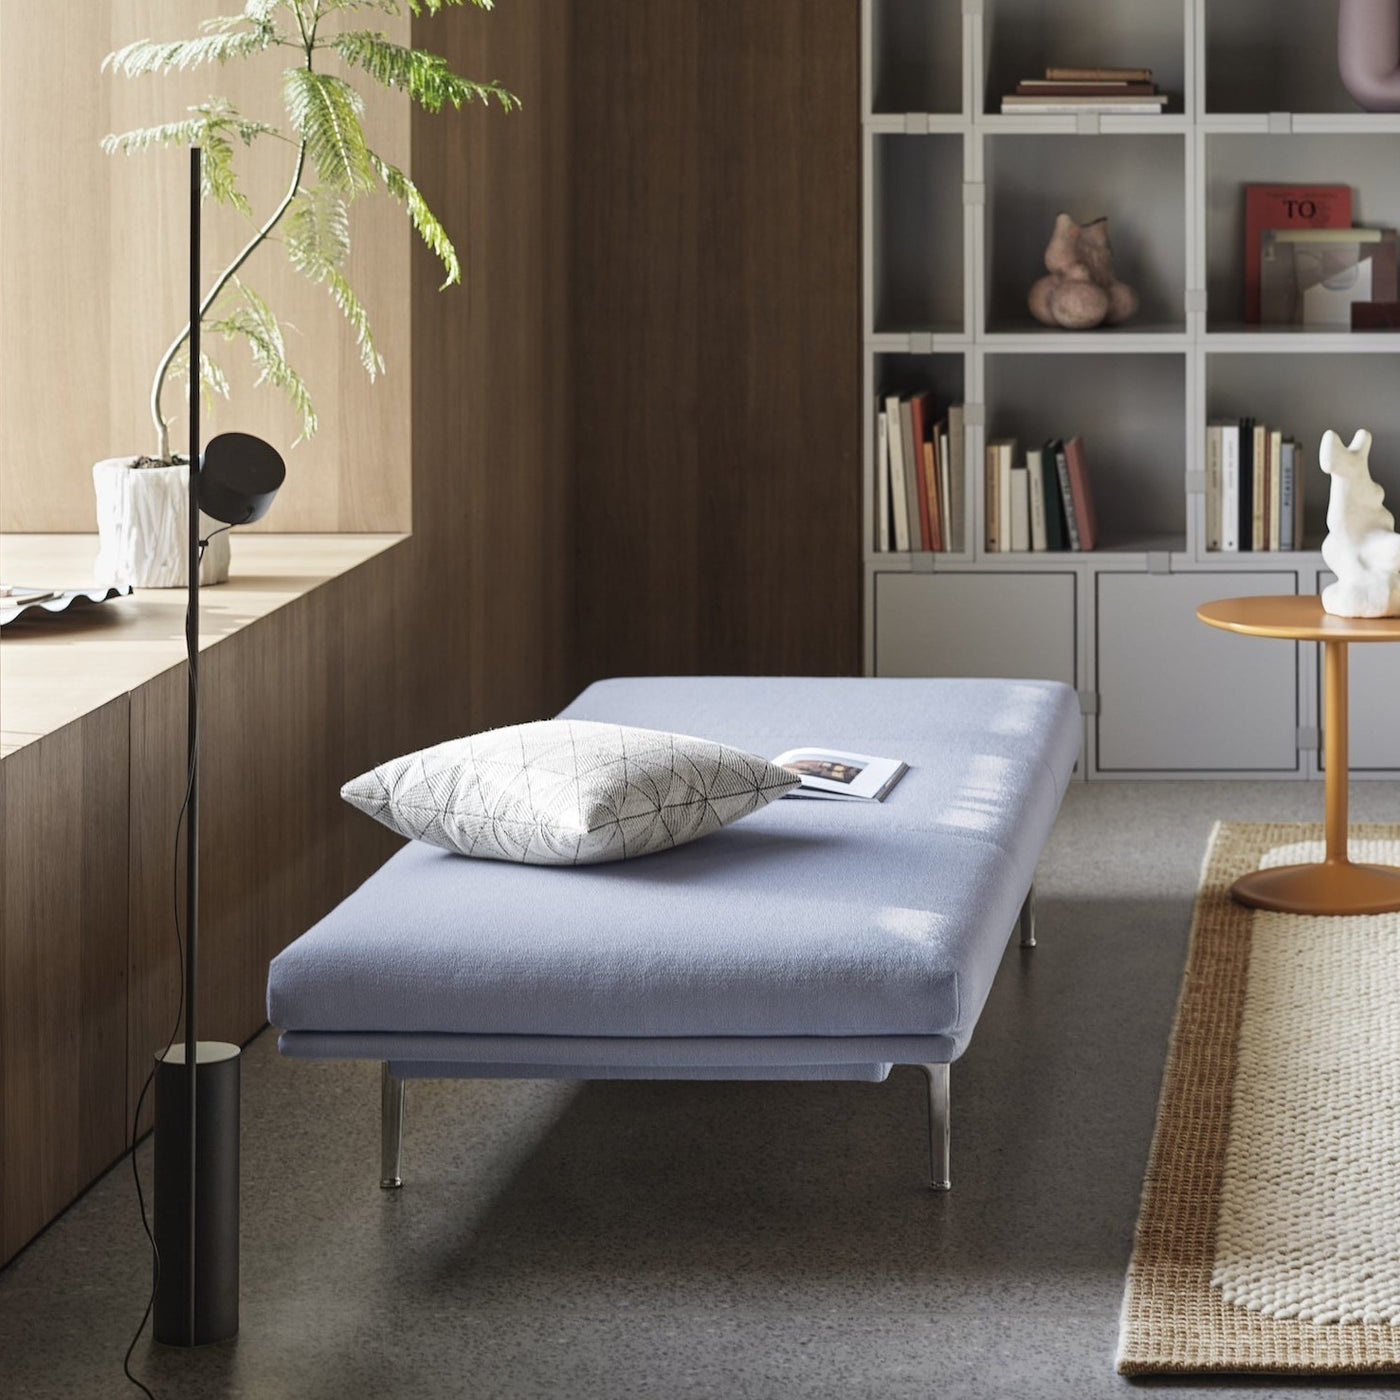 Muuto Outline Daybed in Vidar light blue with polished aluminium legs. Made to order from someday designs